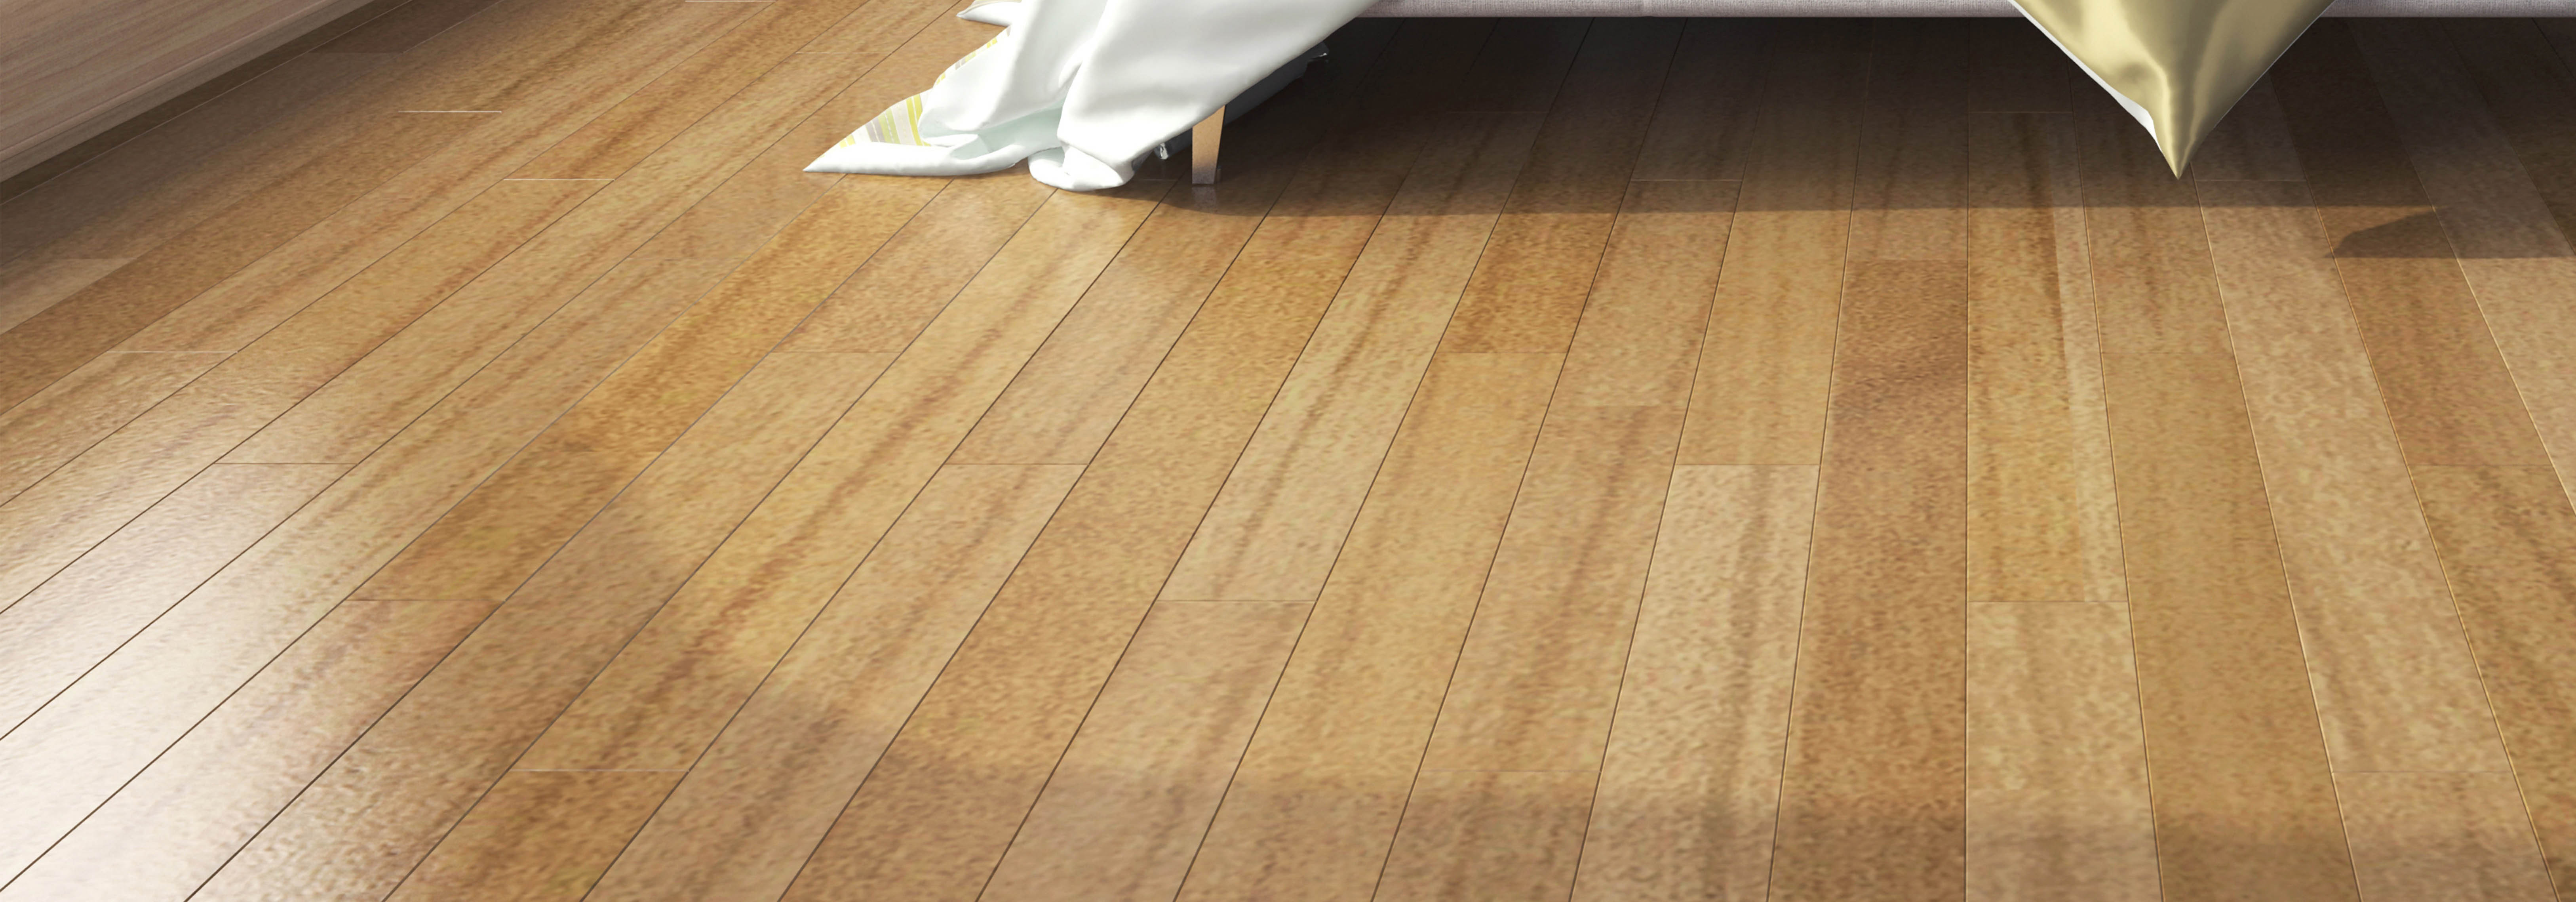 28 Famous Hardwood Floor solutions 2022 free download hardwood floor solutions of wooden floor company flooring pany in little falls ny floor with regard to wooden floor company flooring pany in little falls ny